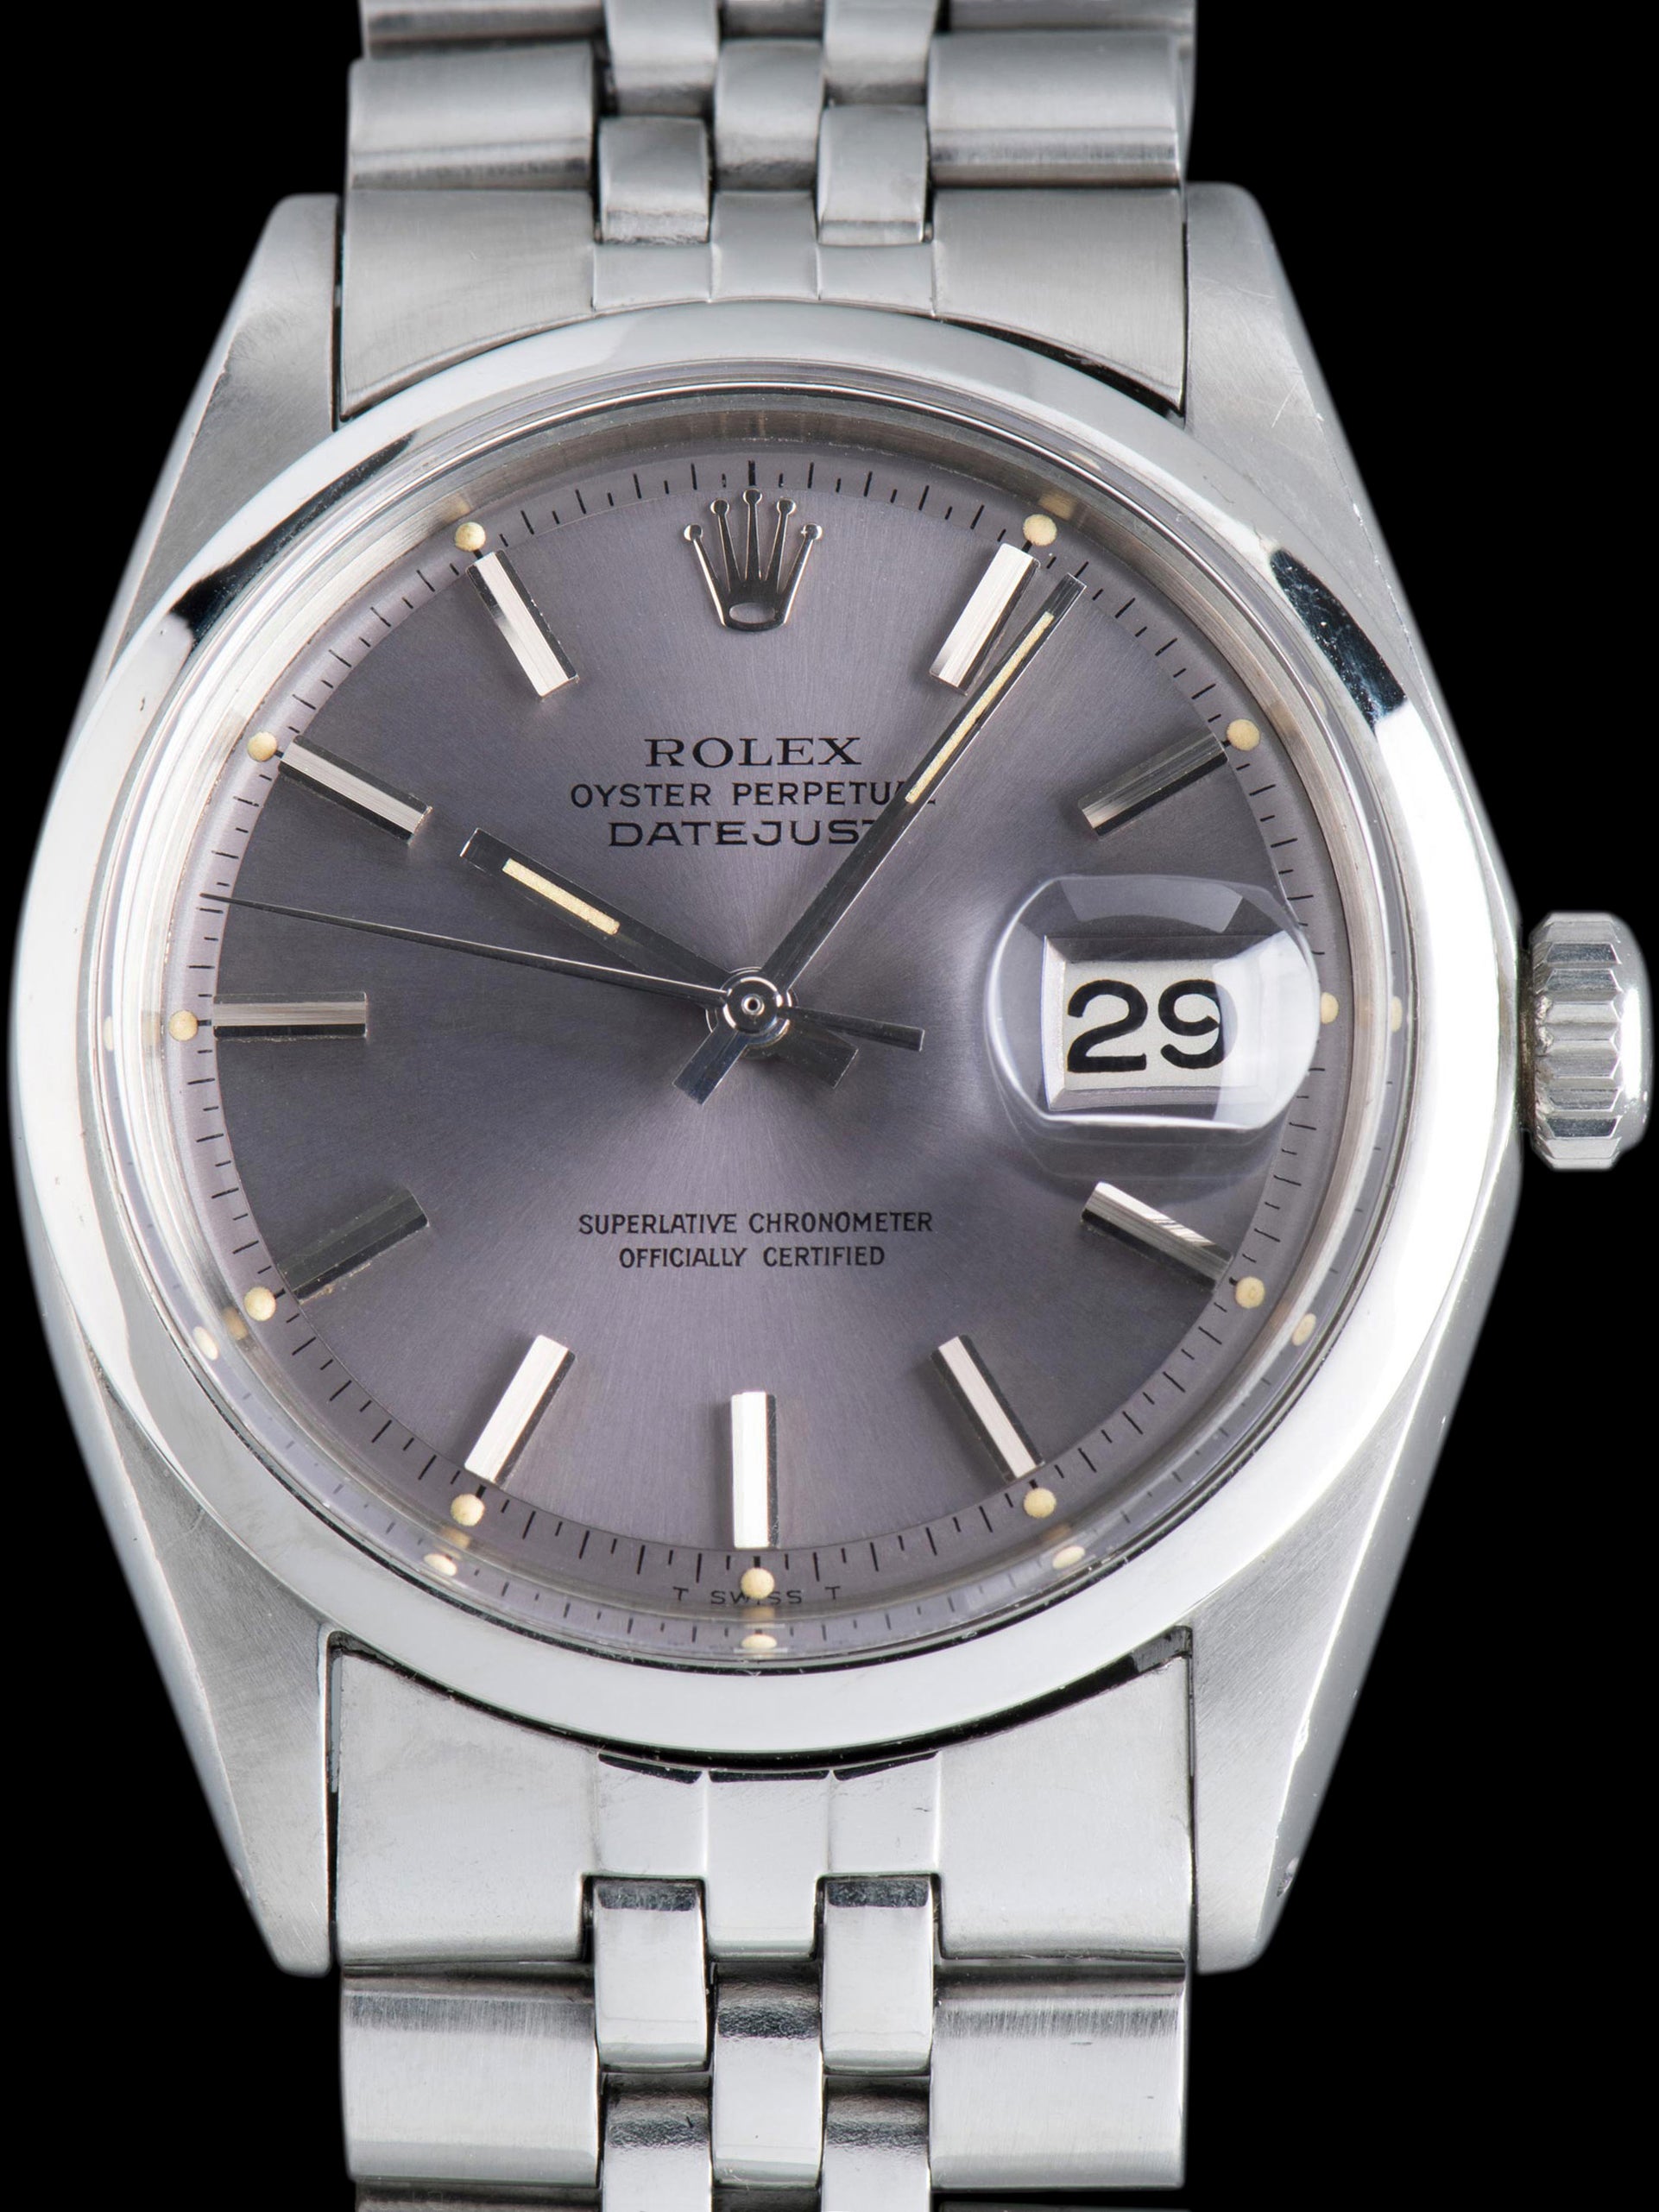 1970 Rolex Datejust (Ref. 1600) Lavender Dial W/ Papers & Accessories